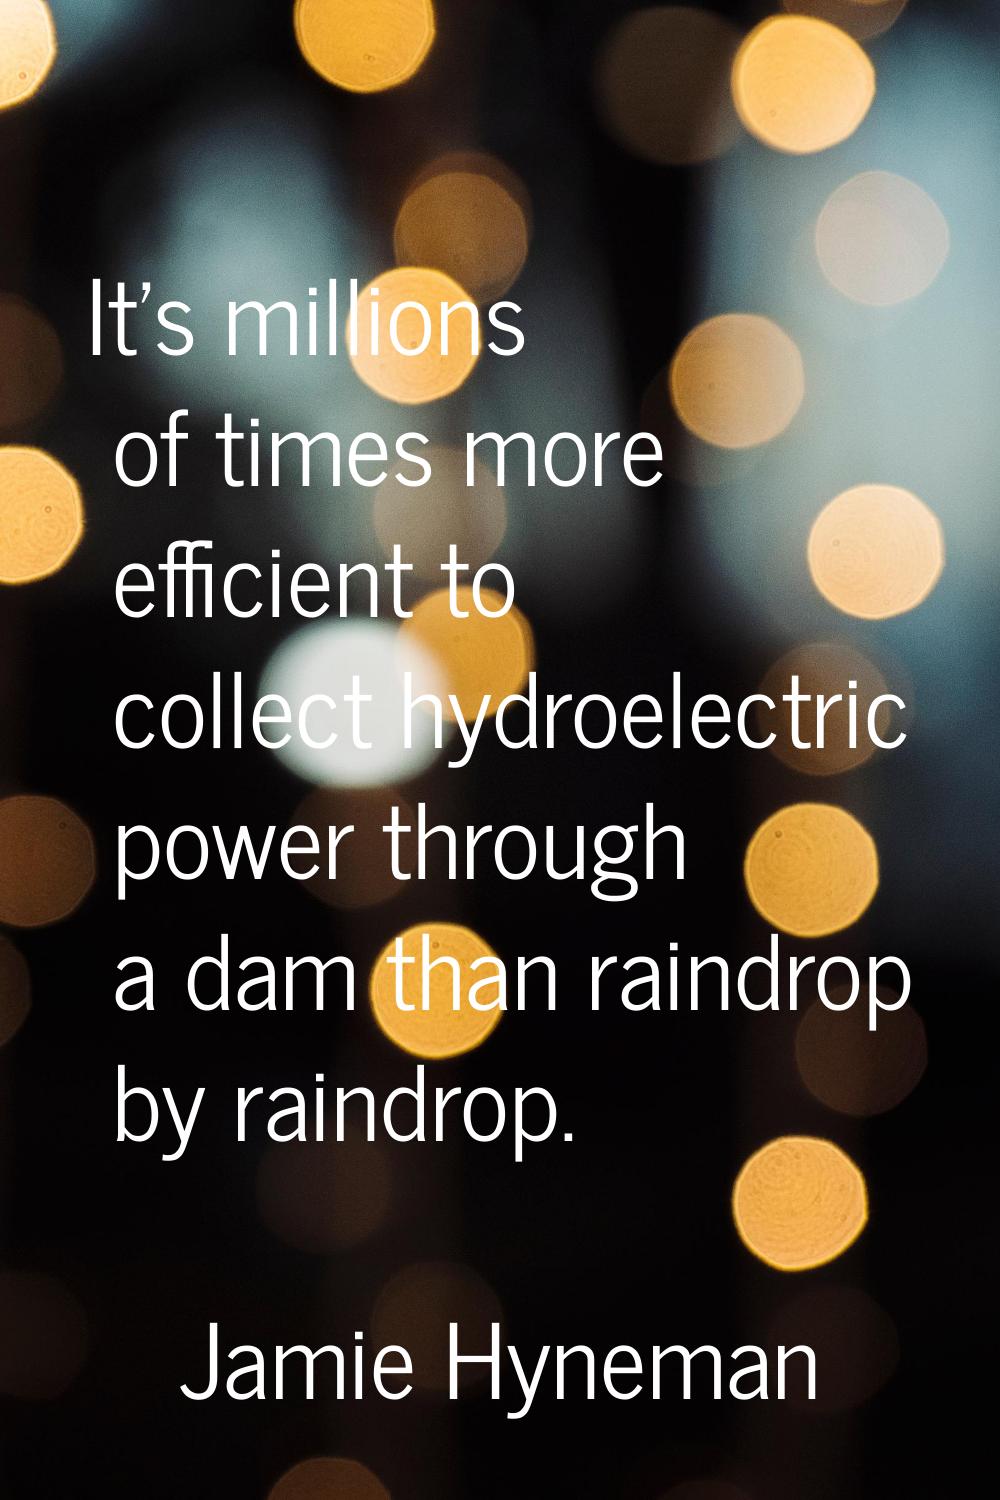 It's millions of times more efficient to collect hydroelectric power through a dam than raindrop by